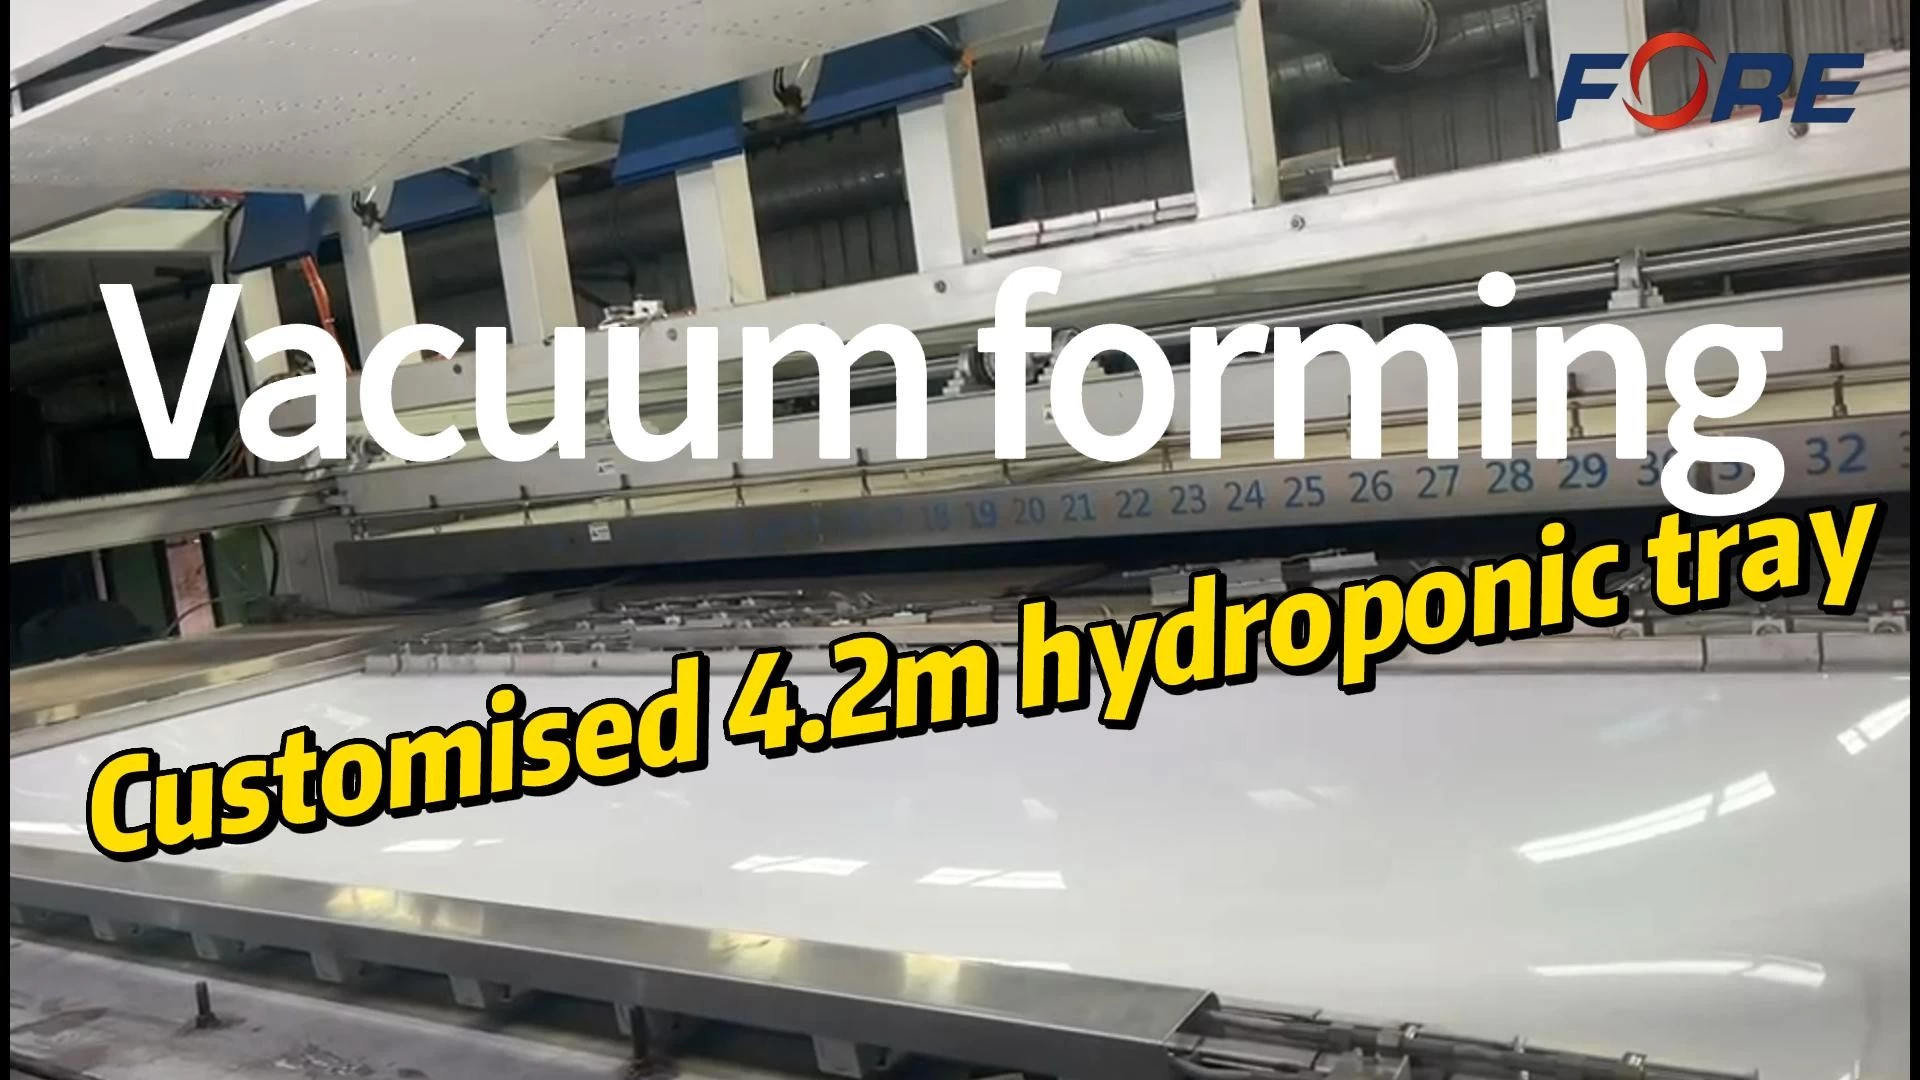 Vacuum forming of customised 4.2m hydroponic trays